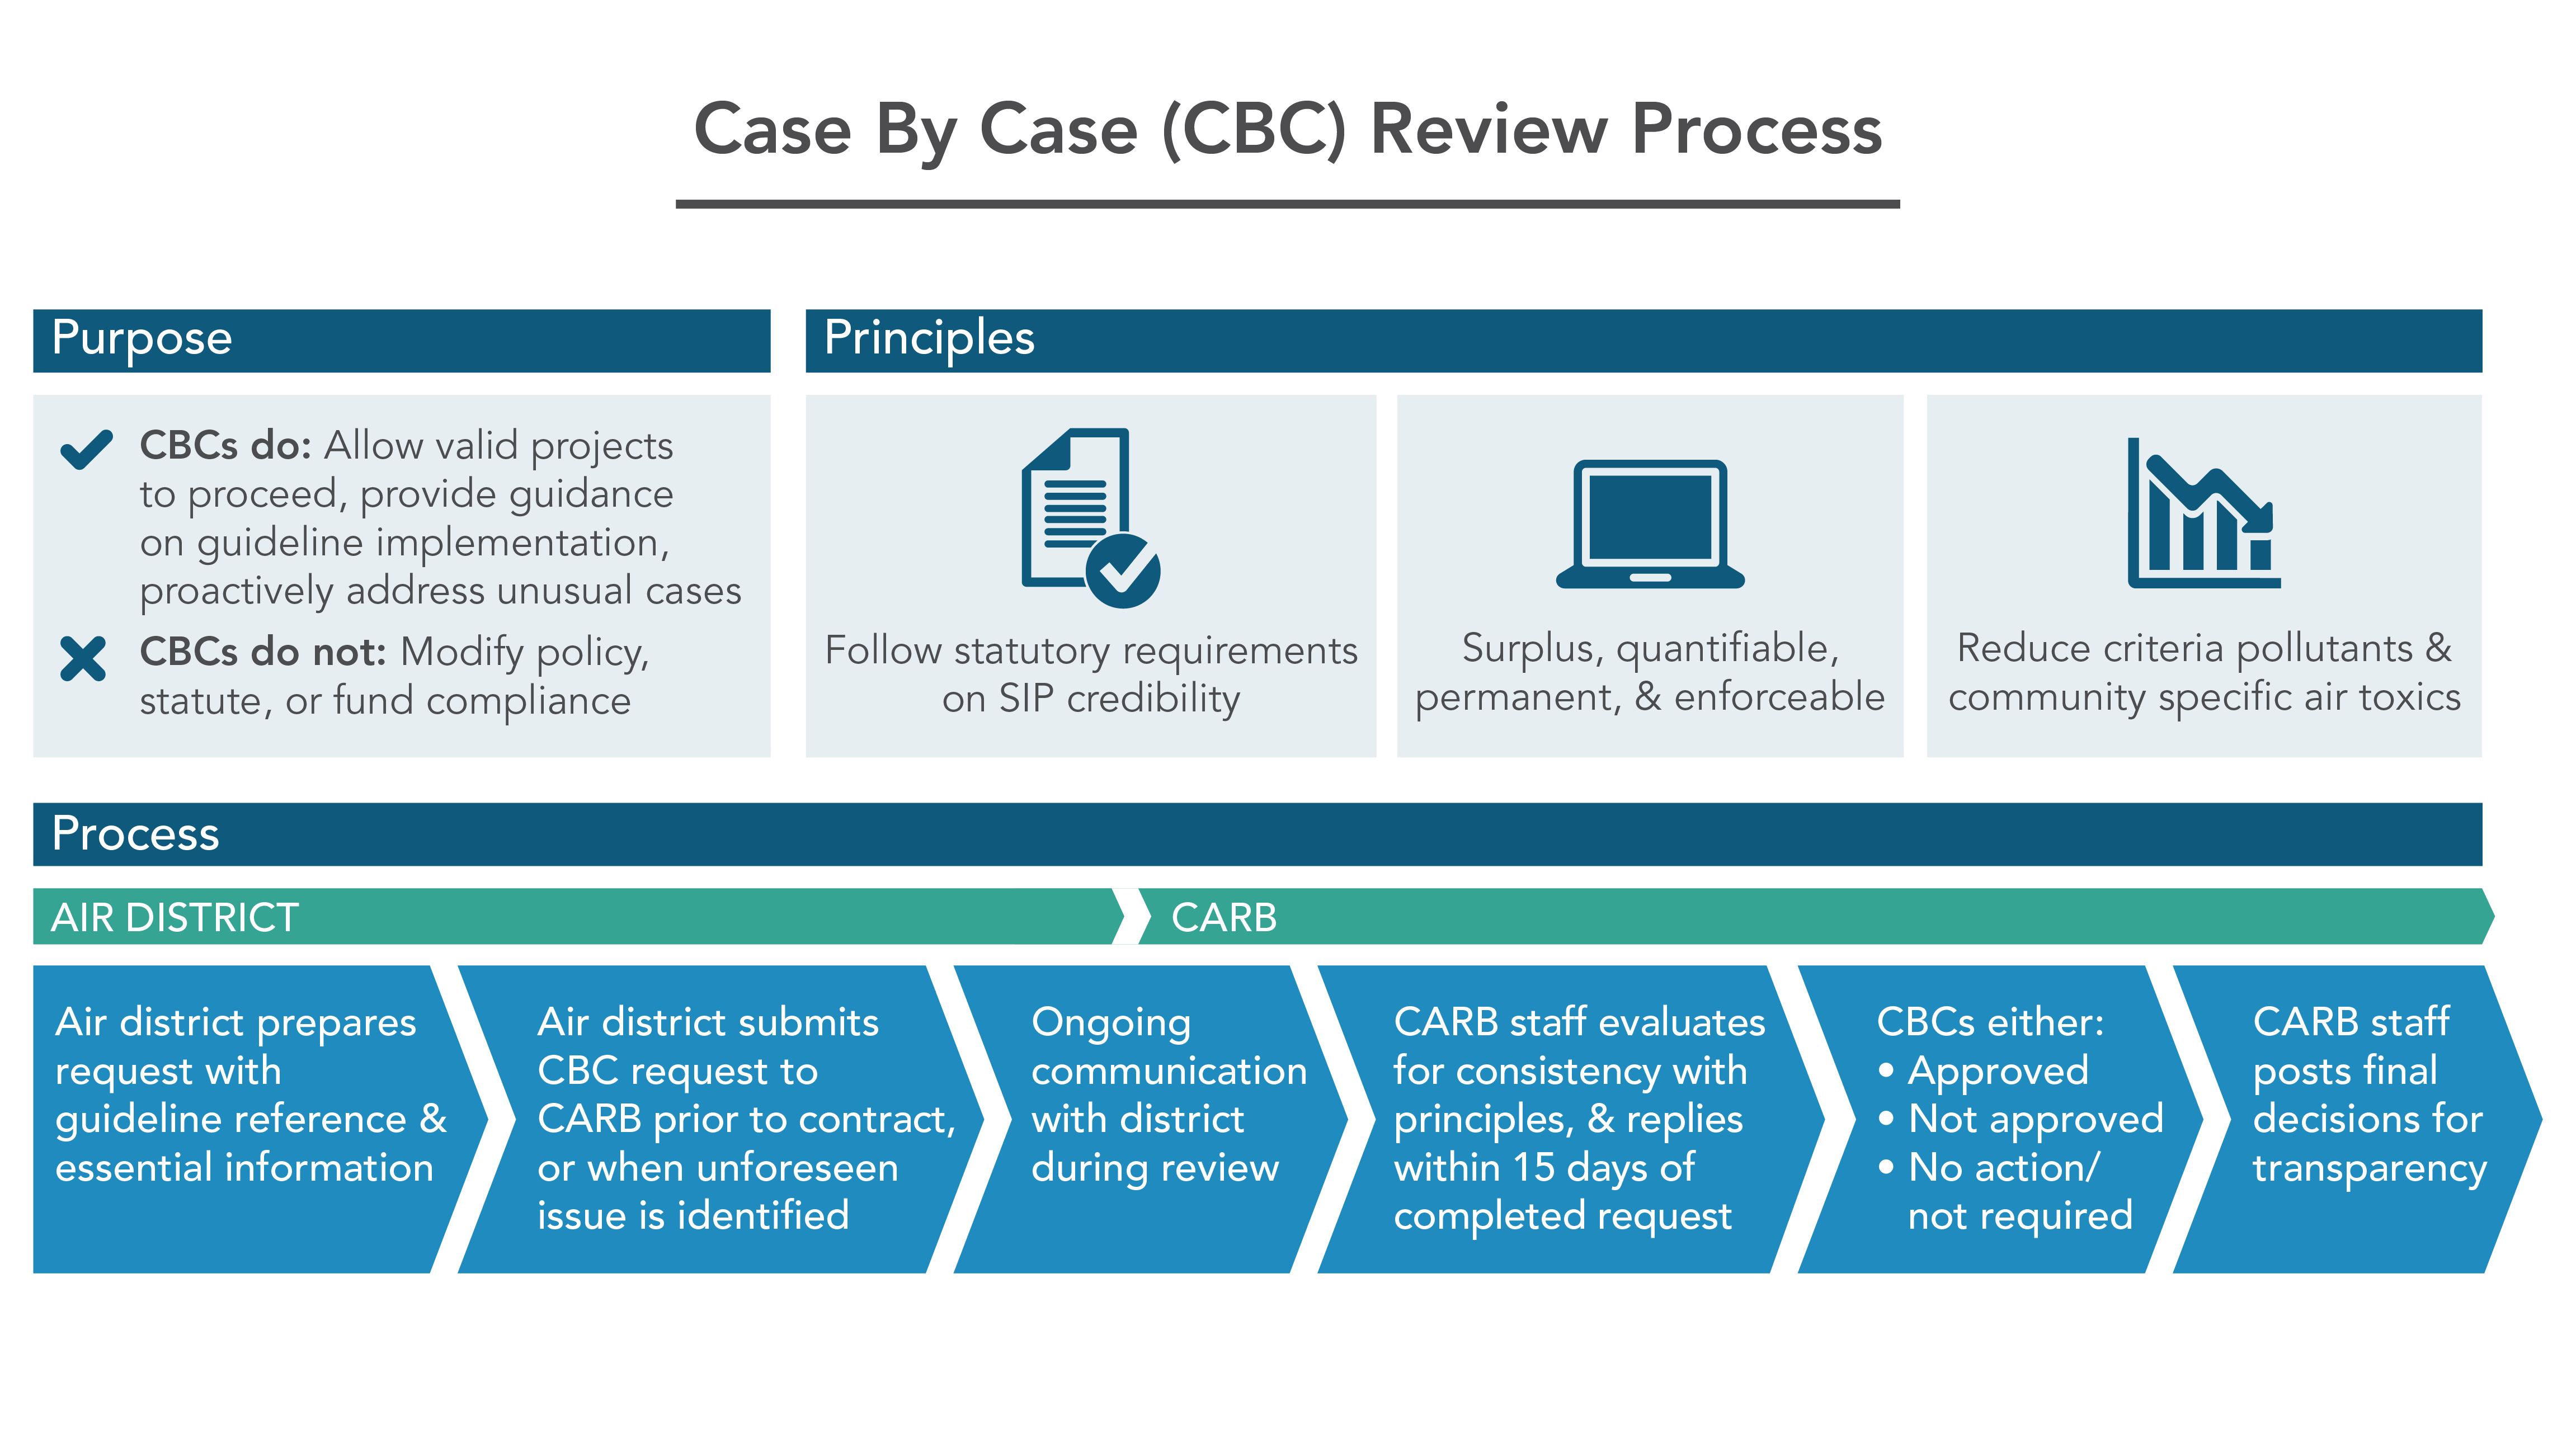 The graphic depicts the Case by Case (CBC) Review Process. In a box labeled Purpose, it lists a check mark and an x. The check mark reads CBCs do: Allow valid projects to proceed, provide guidance on guideline implementation, proactively address unusual cases. The X symbol reads CBCs do not modify policy, statute, or fund compliance. The box to the right of is titled Principles. It has 3 boxes underneath it. The first box has an icon of a sheet of paper with a checkmark. Underneath it is reads Follow statutory requirements on SIP credibility. The second box has an icon of a computer. Underneath it, it reads surplus, quantifiable, permanent, and enforceable. The third box has an icon of a chart with a downward aiming arrow. It reads reduce criteria pollutants and community specific air toxics. Directly underneath the Purpose and Principles boxes is a thin section titled Process. Underneath it is an arrow flowchart that depicts what processes the air districts over see and which ones are over seen by CARB.  Under the district process are the following steps: step 1 air district prepares request with guideline reference and essential information, step 2 Air district submits CBC request to CARB prior to contract, or when unforeseen issue is identified, Both the air district and CARB are listed under step 3 which is: ongoing communication with district during review. The next steps are listed under the CARB process. Step 4 CARB staff evaluates for consistency with principles, and replies within 15 days of completed request. Step 5 CBCs either approved, not approved, or no action/ not required. Last step, step 6 CARB staff posts final decisions for transparency. That completes the process.